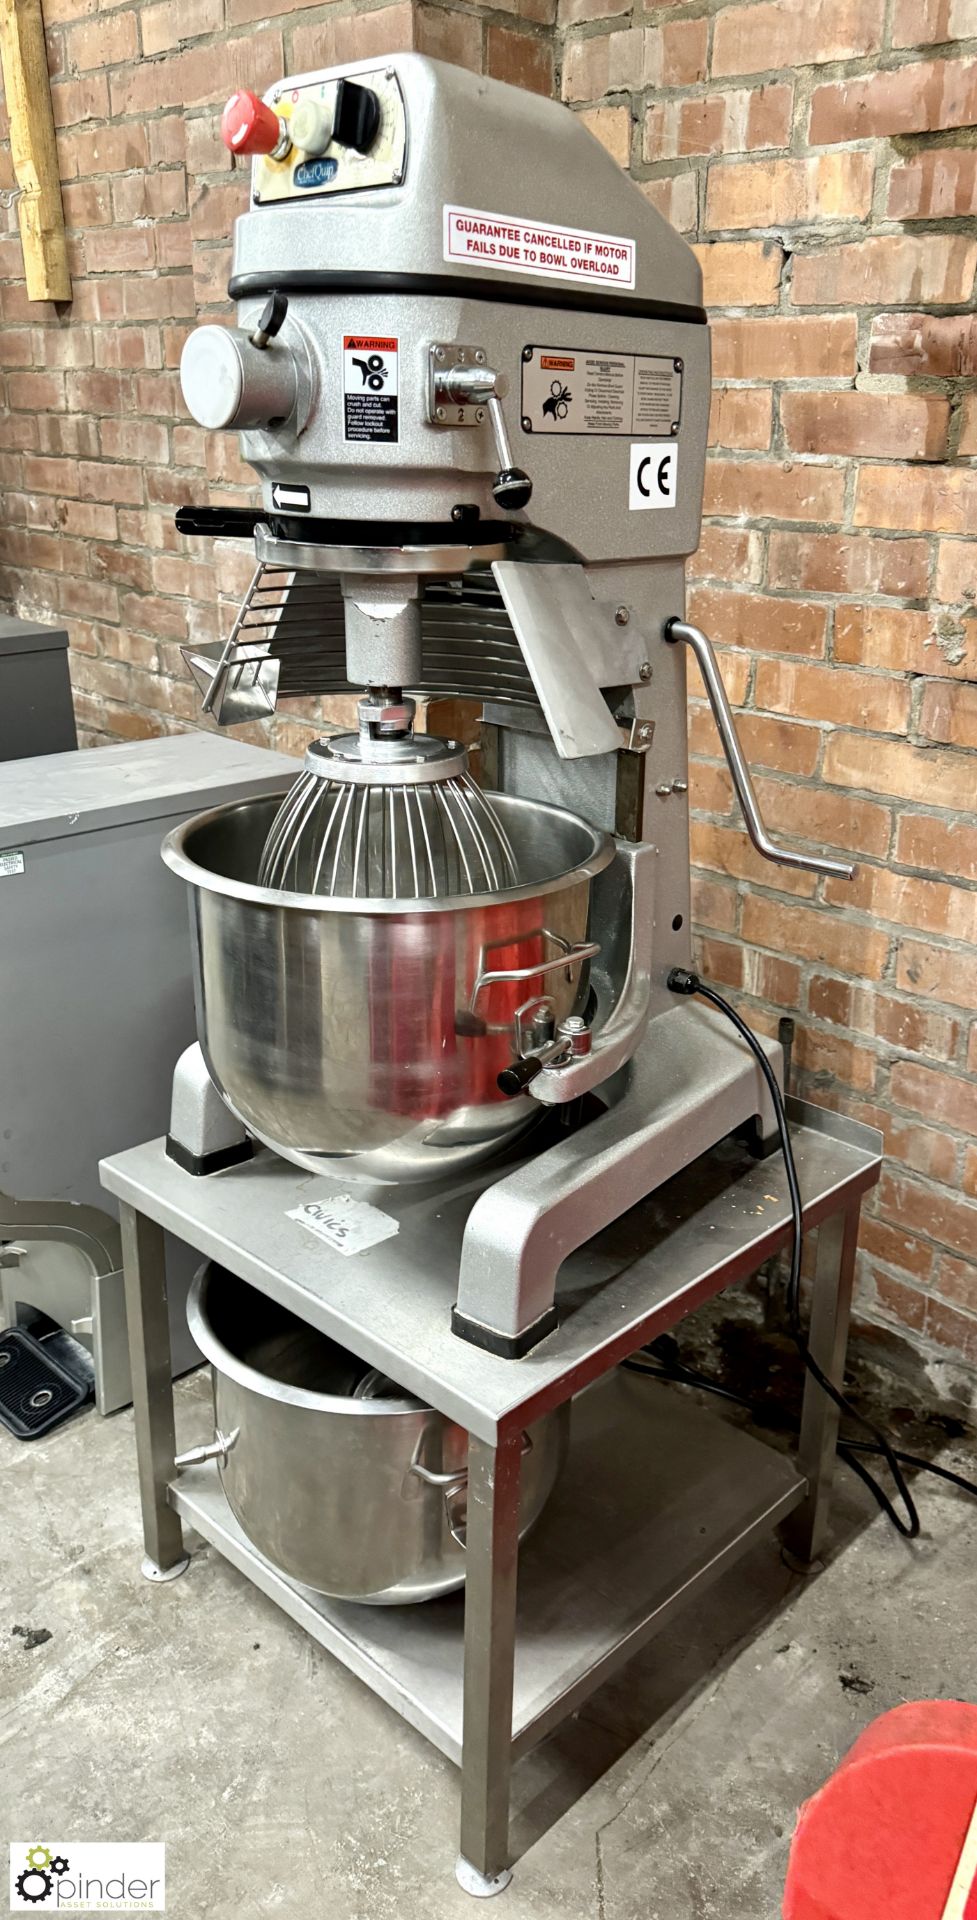 Spar Food Machinery SP-22HA-B Planetary Food Mixer, 240volts, with 2 bowls, whisk, dough hook, - Image 3 of 8